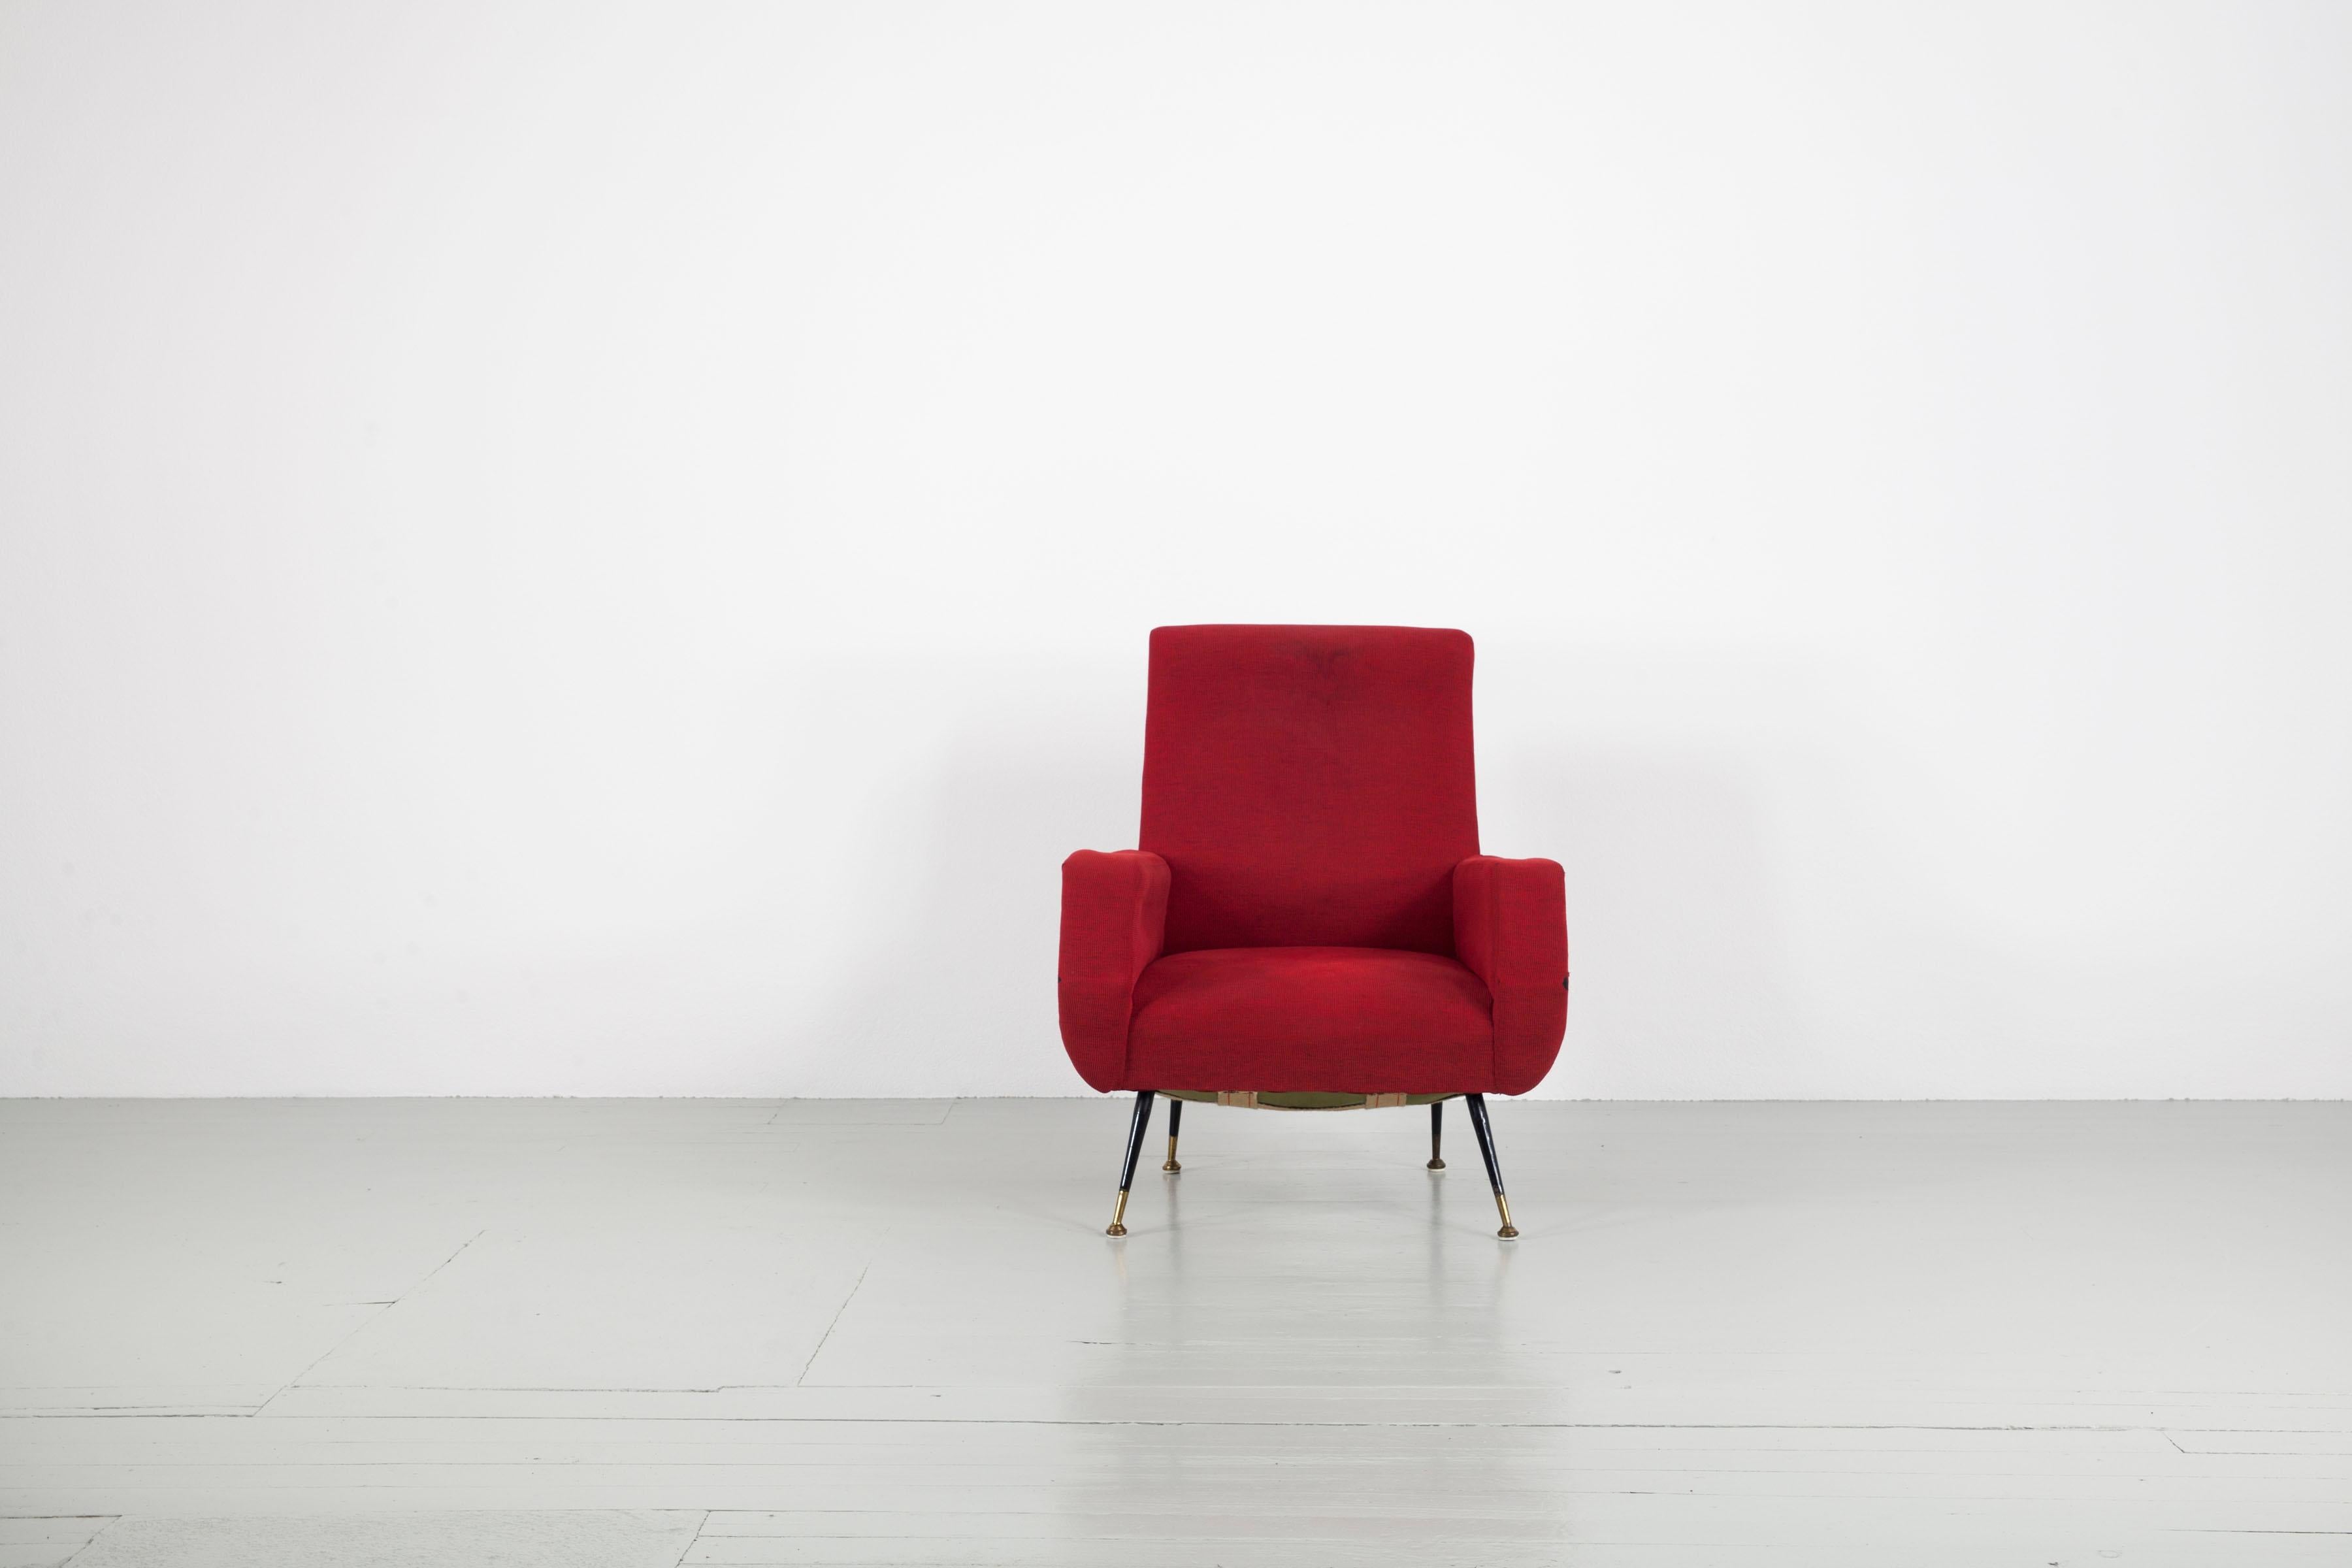 Armchair from Italy, 1950s. This piece is closely related in design to the tradition of Gianfranco Frattini. The armchair has the typical metal feet with brass elements and a red upholstery fabric. The armchair needs to be reupholstered.